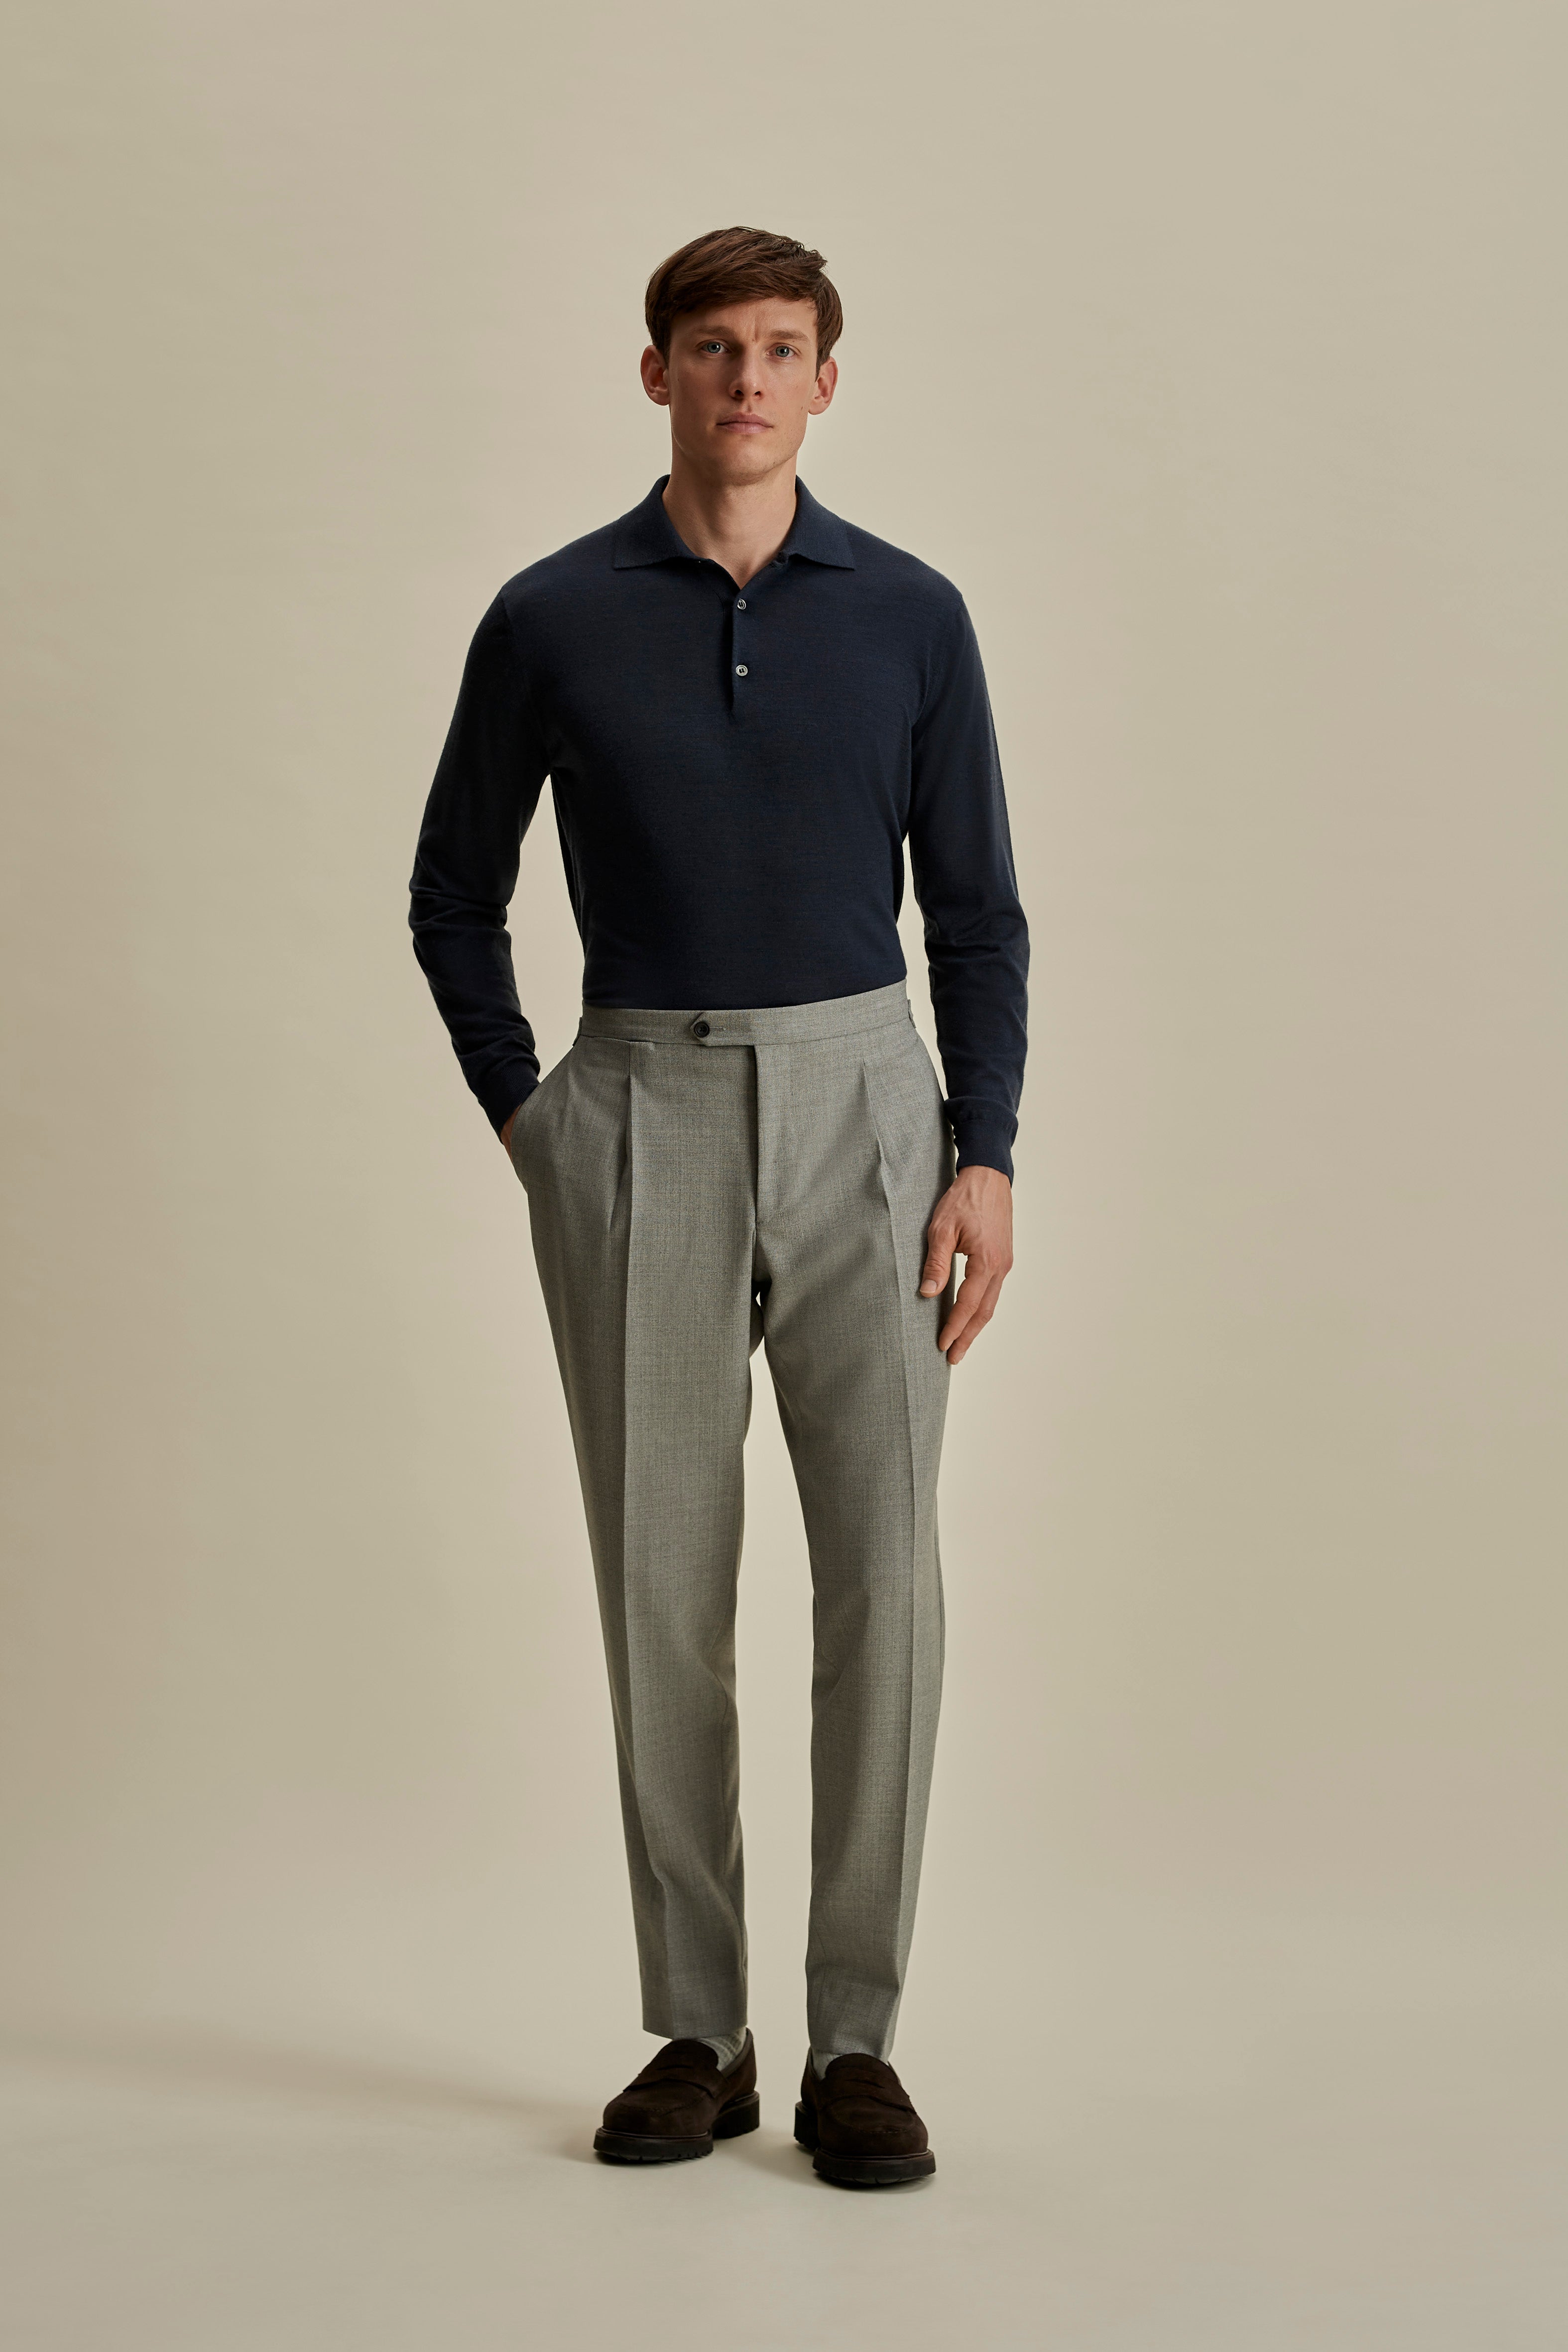 Wool Single Pleat Tailored Trousers Cool Grey Full Length Model Image